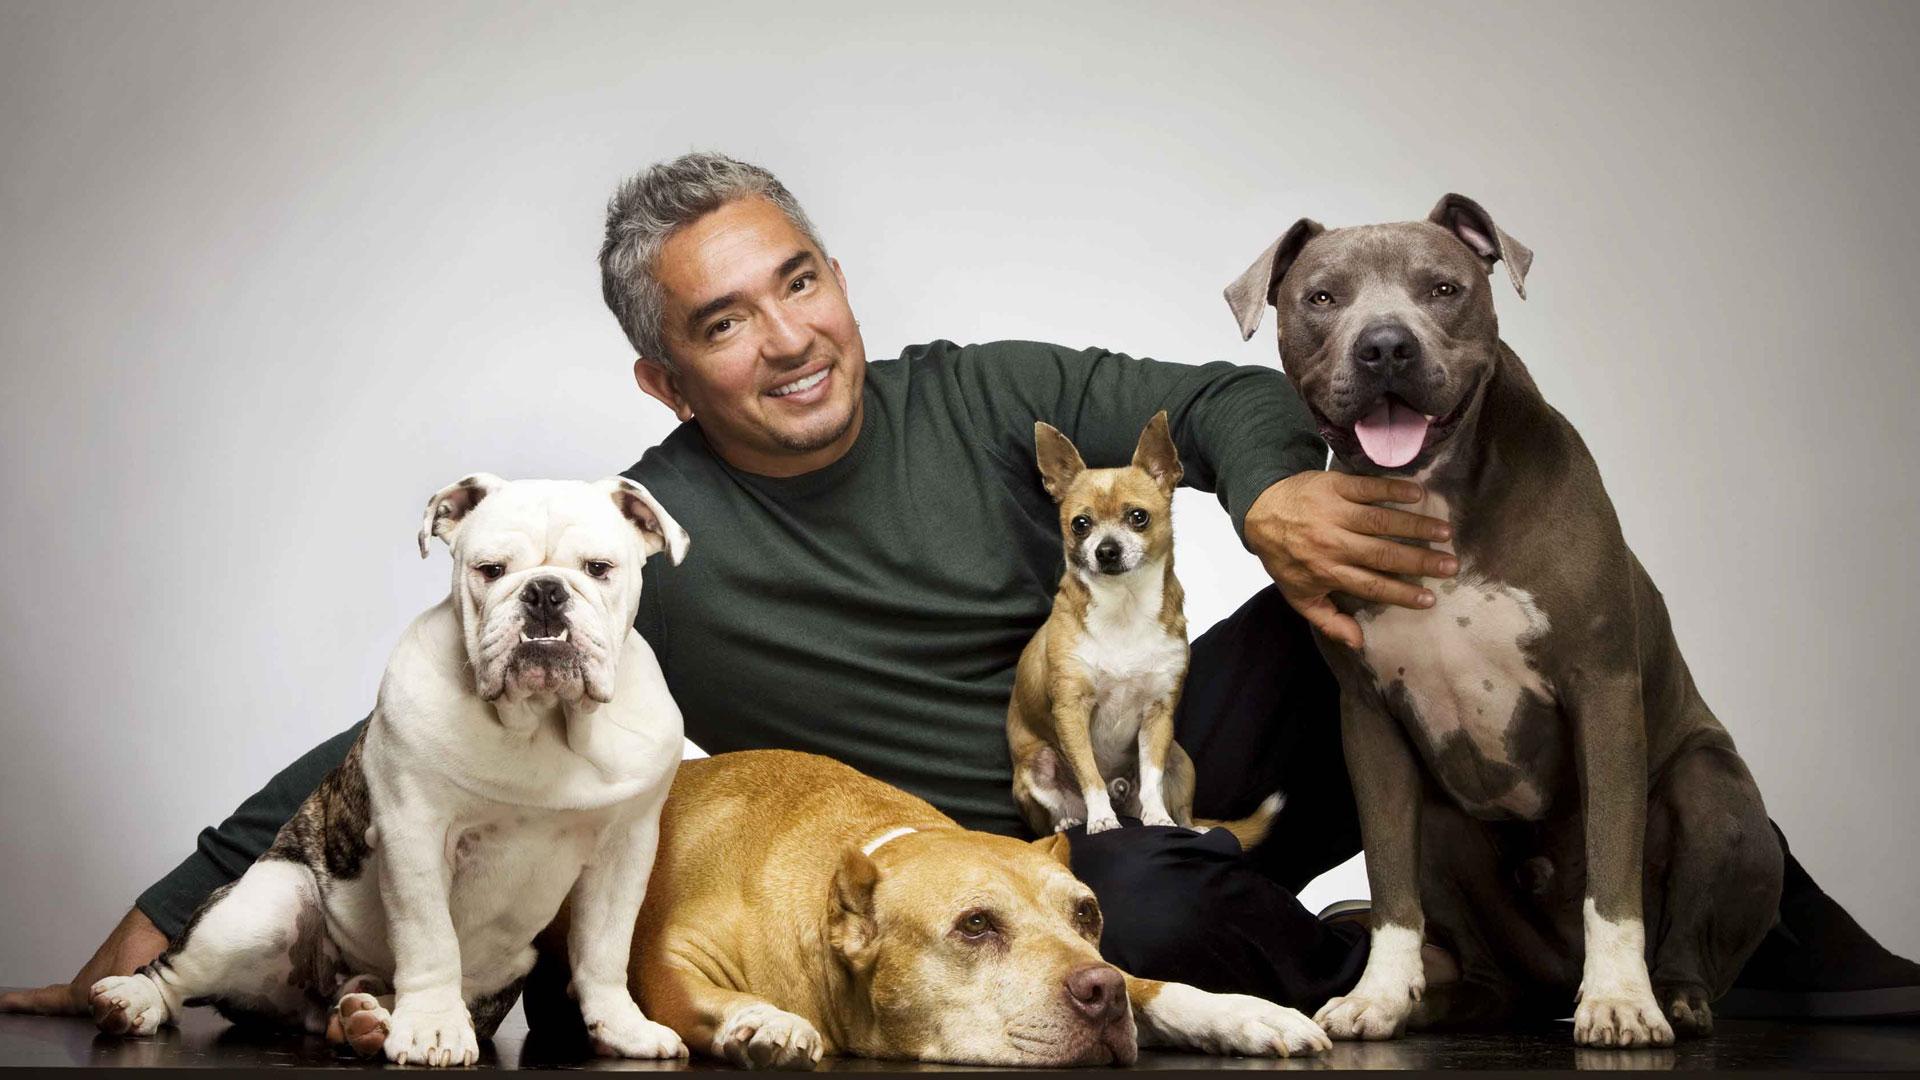 Cesar Millan: I'm not cruel to animals. The Big Issue